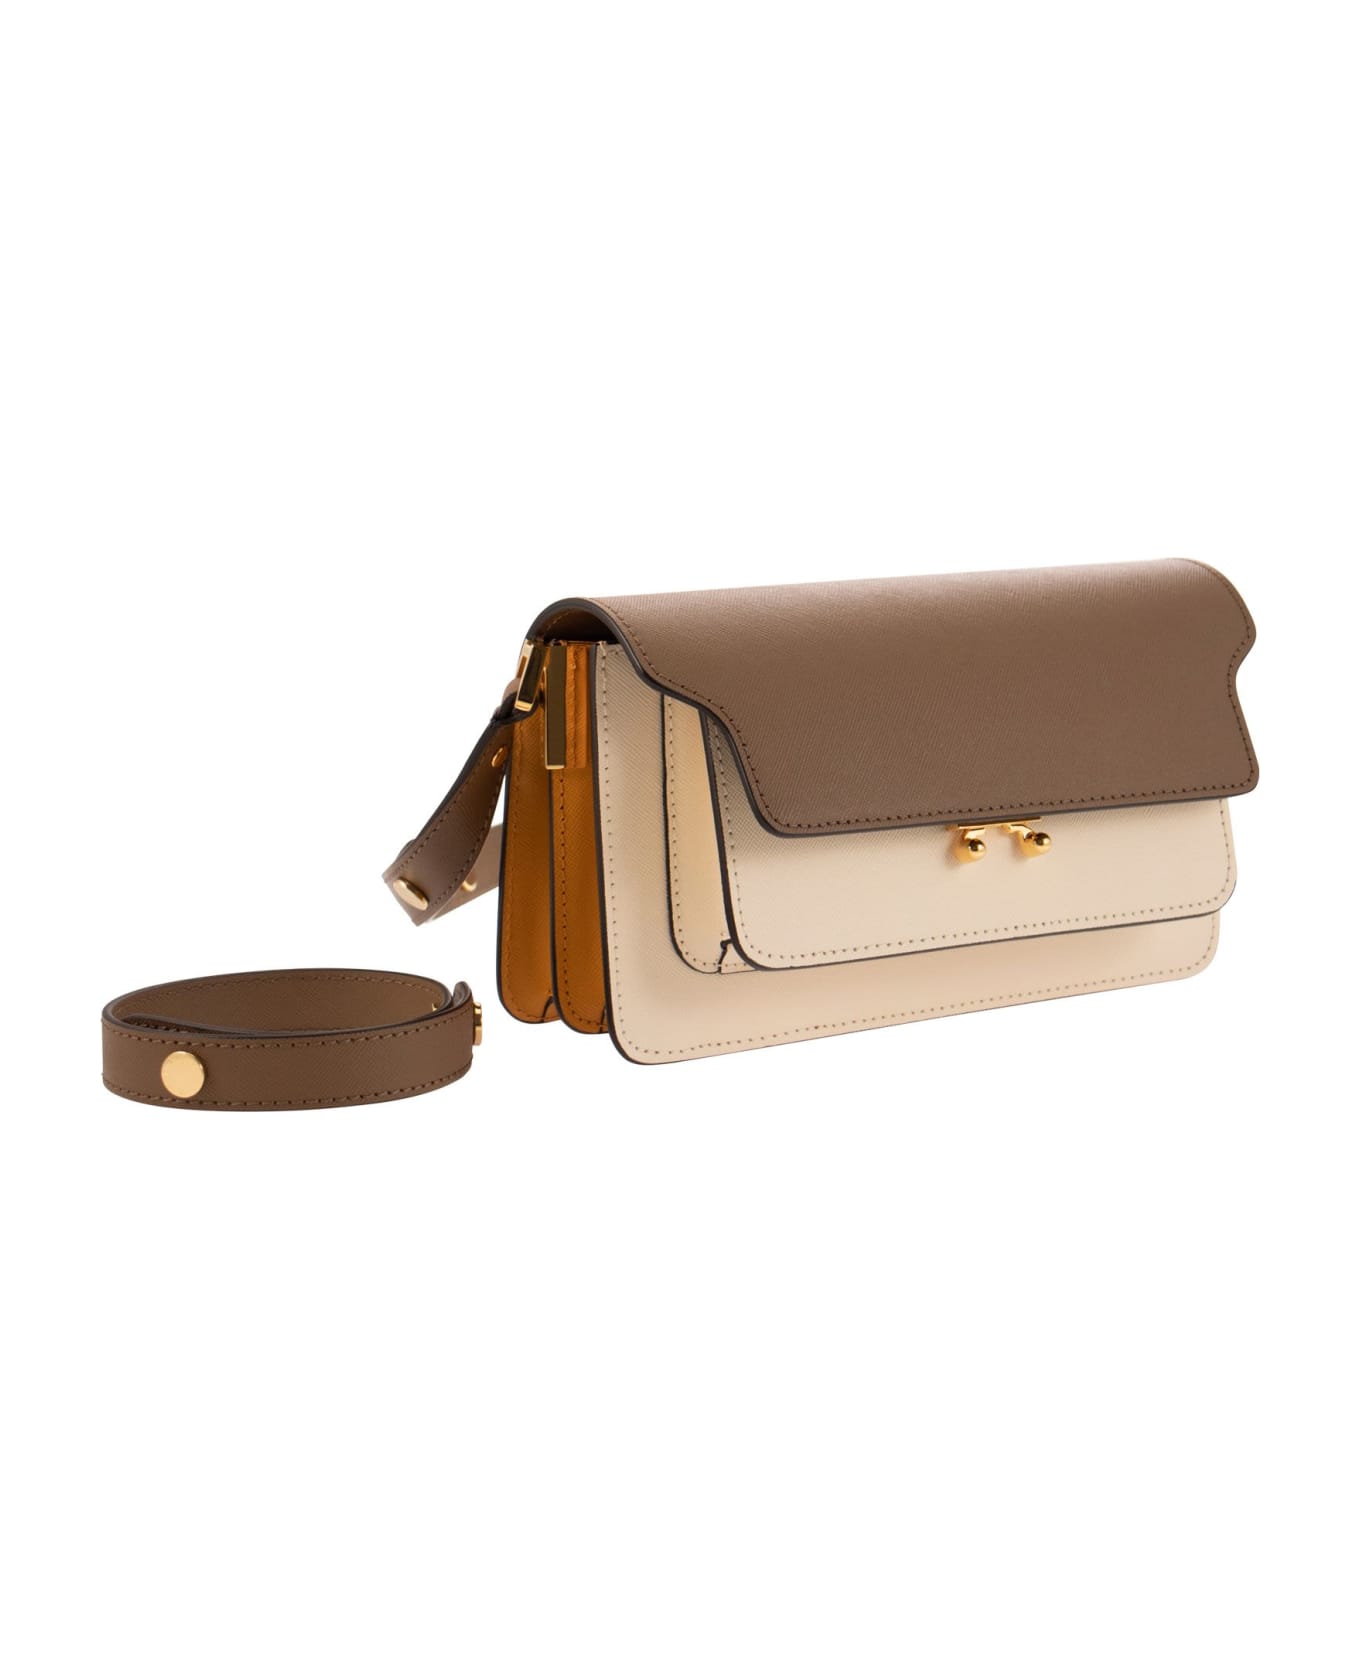 Marni White And Brown East/west Trunk Bag In Saffiano Leather - Brown ショルダーバッグ